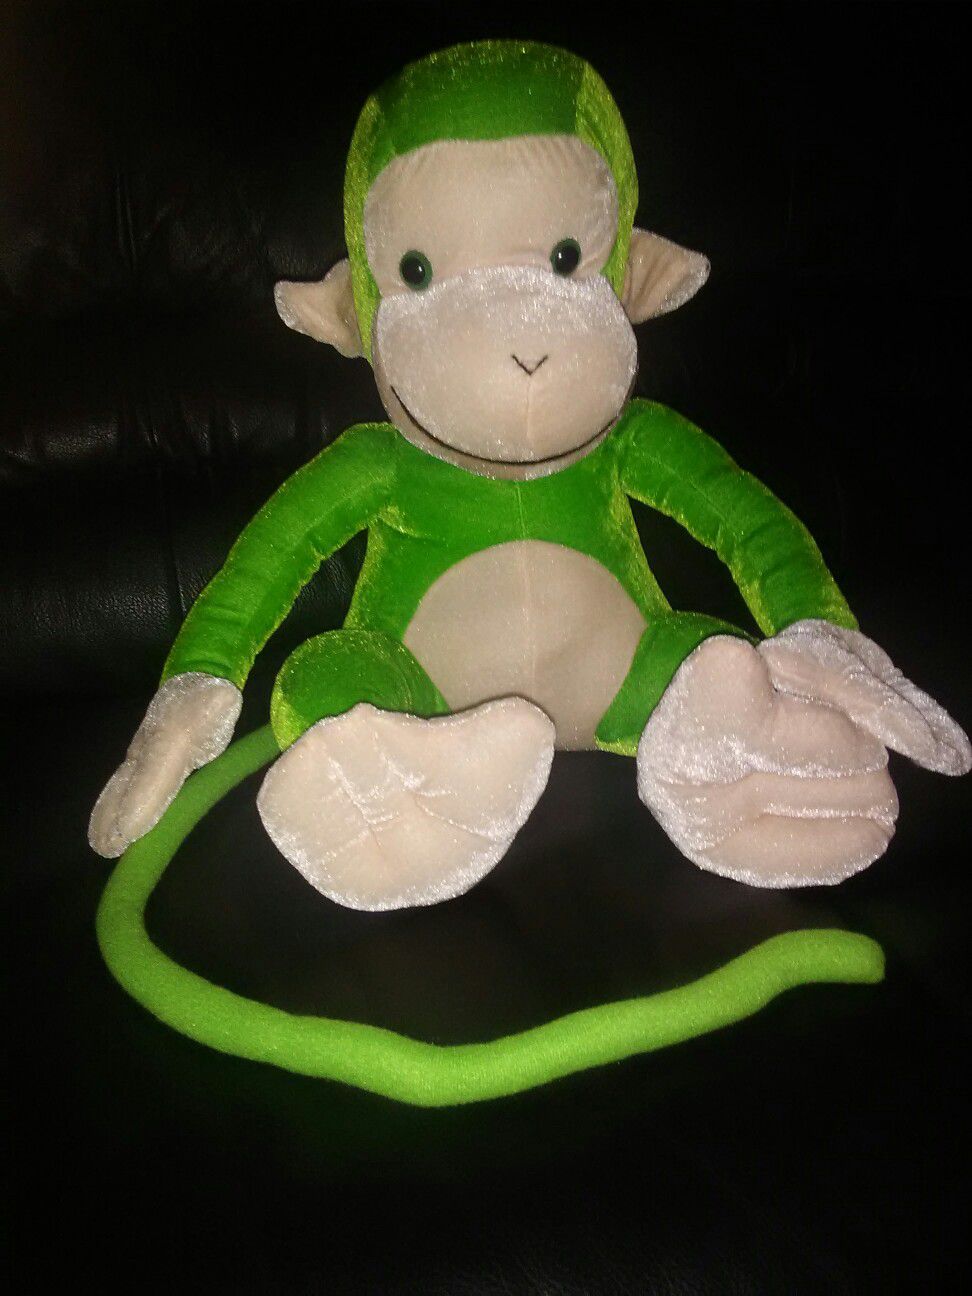 Large 16" Goffa International Stuffed animal monkey with long tail and smile